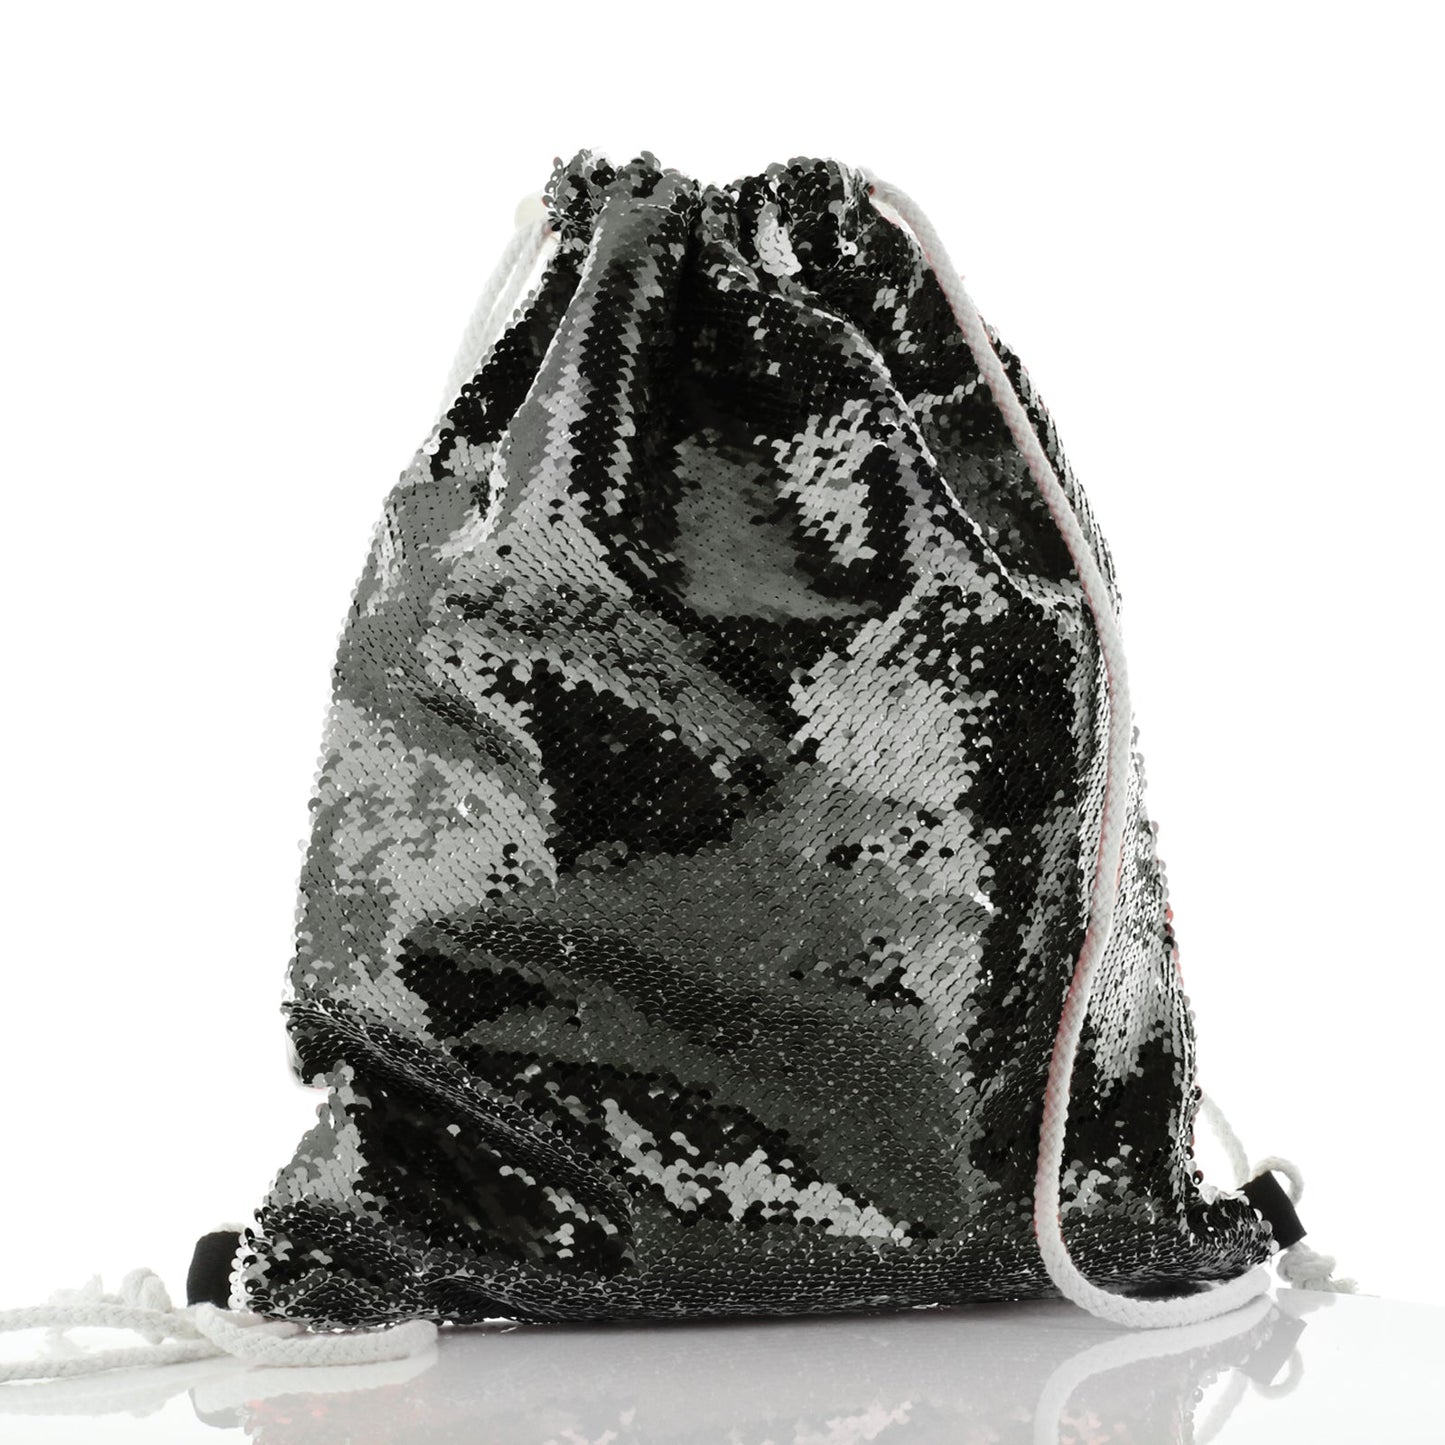 Personalised Sequin Drawstring Backpack with Grey Elephant Feather Hat and Cute Text